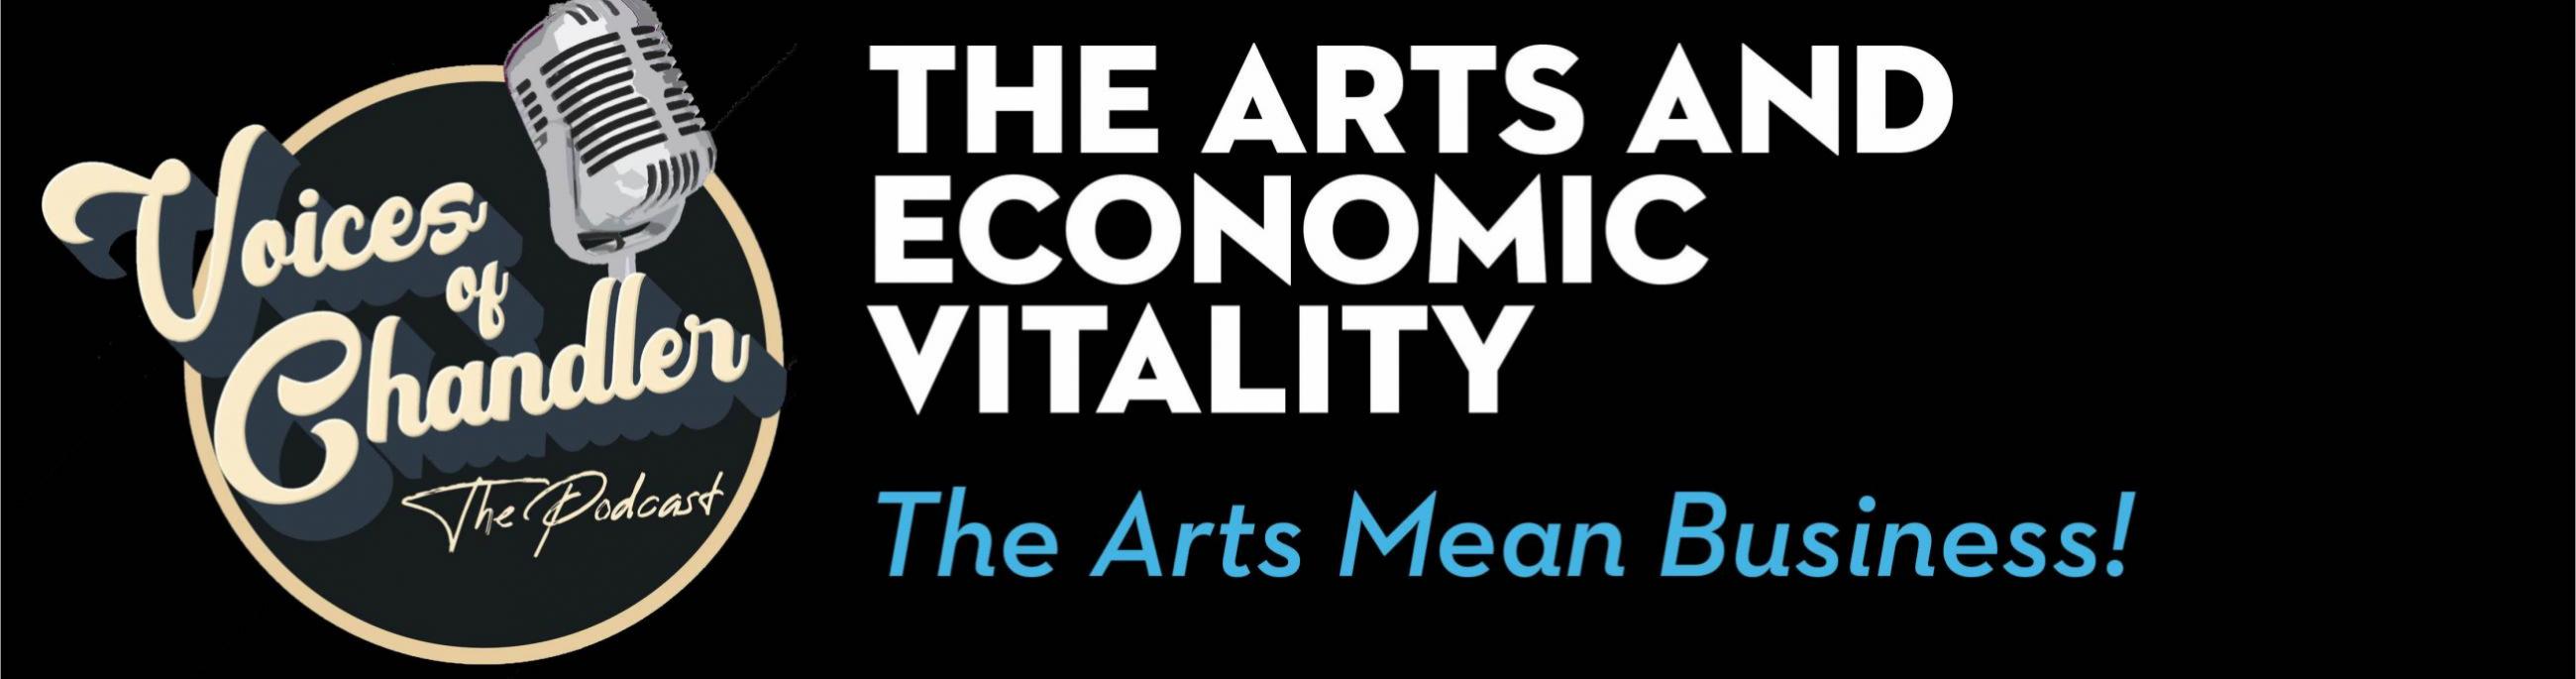 Voices of Chandler LIVE: The Arts and Economic Vitality